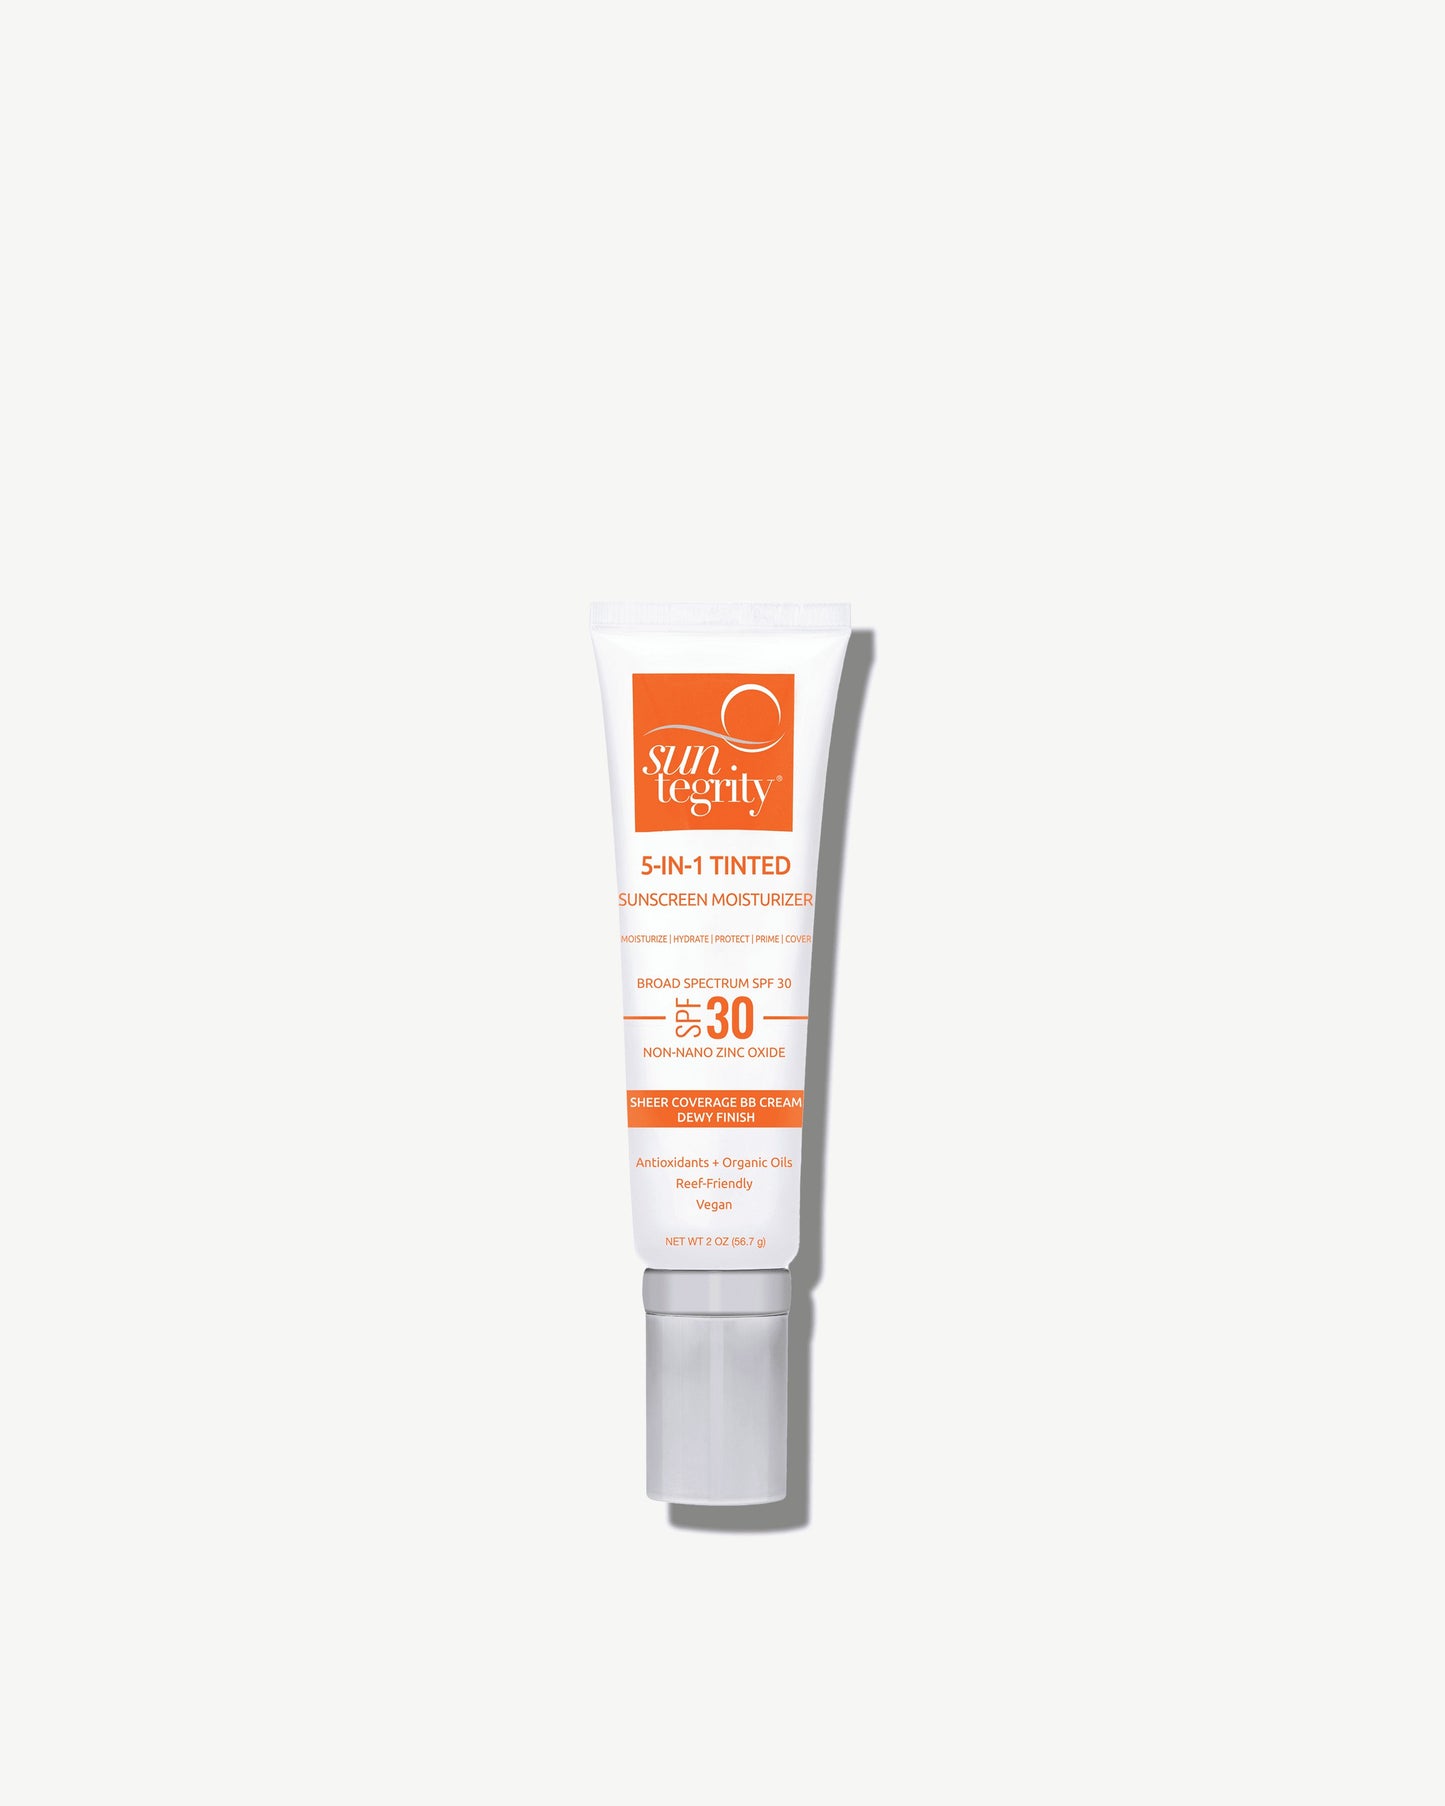 5-in-1 Tinted Moisturizing Face Sunscreen